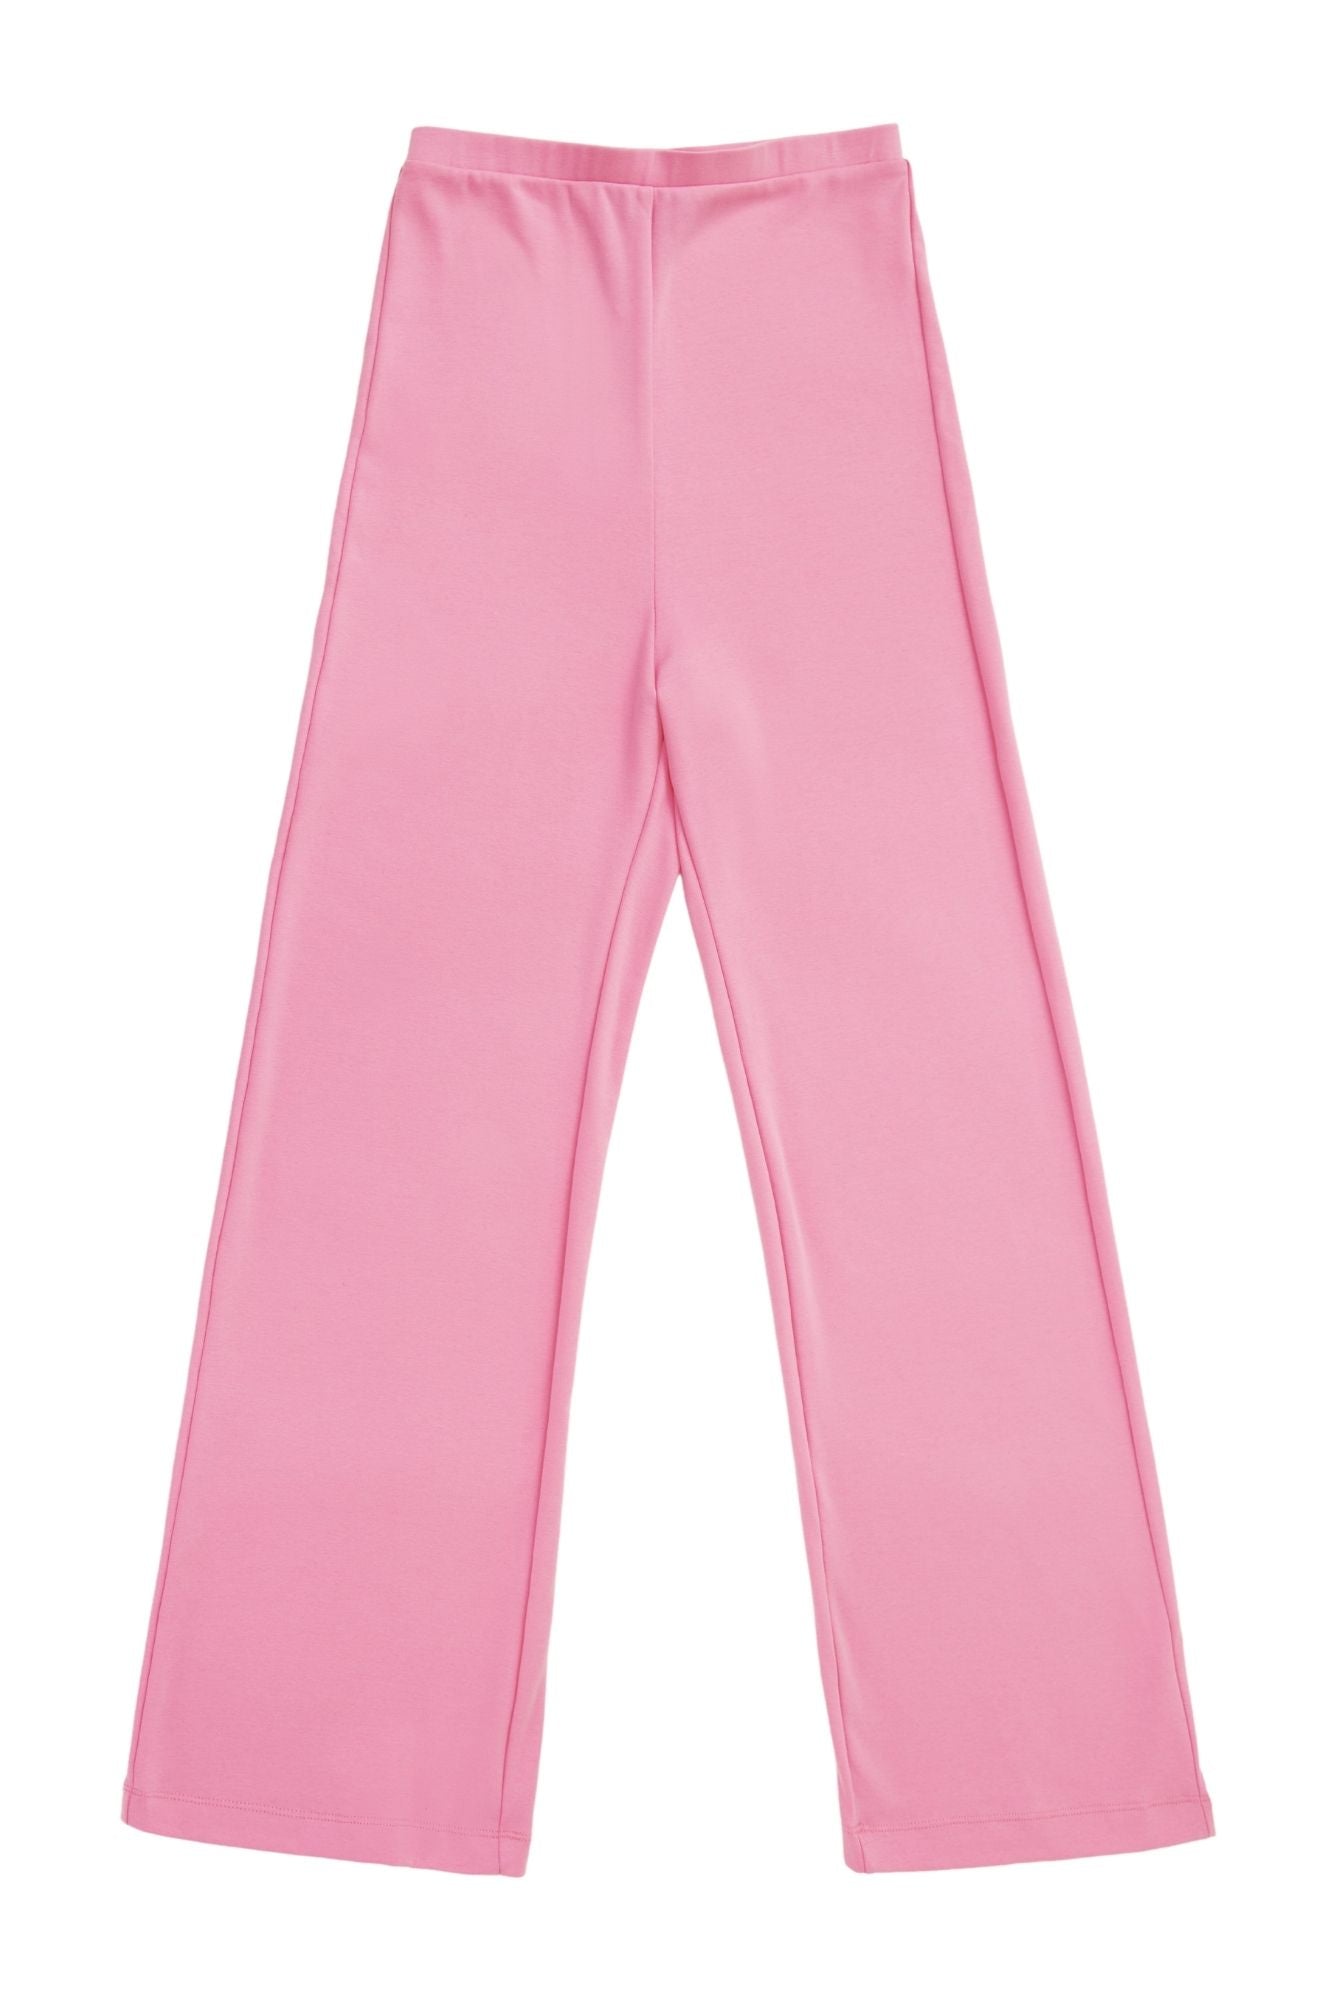 Zahra Over Belly Maternity Pant in the color pink